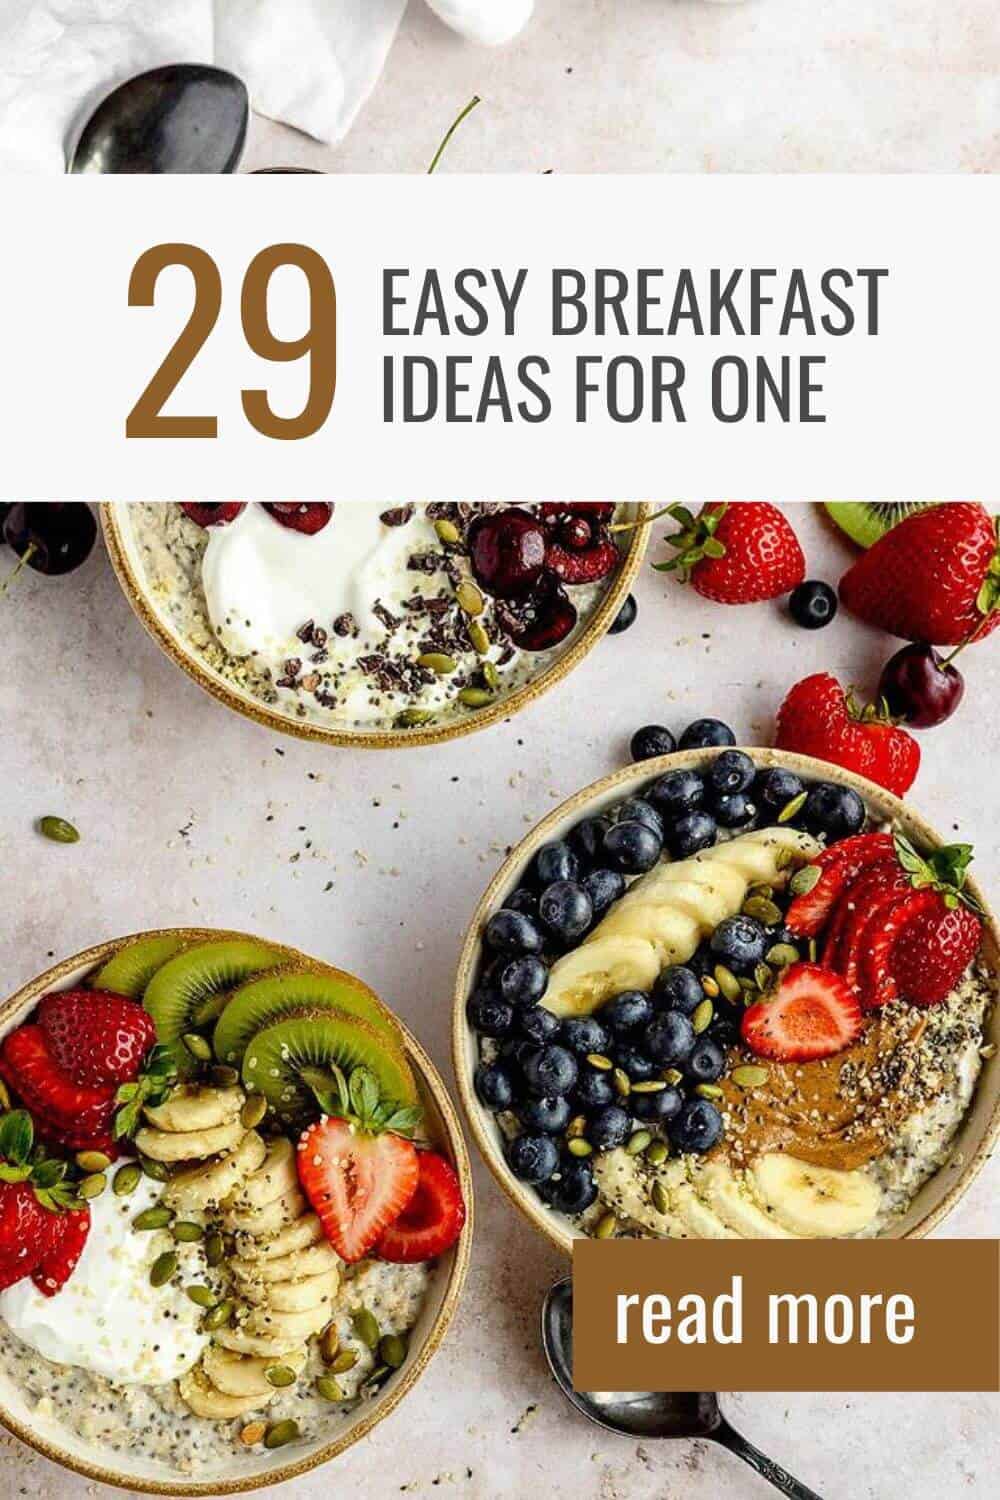 Easy breakfast ideas for one with text.